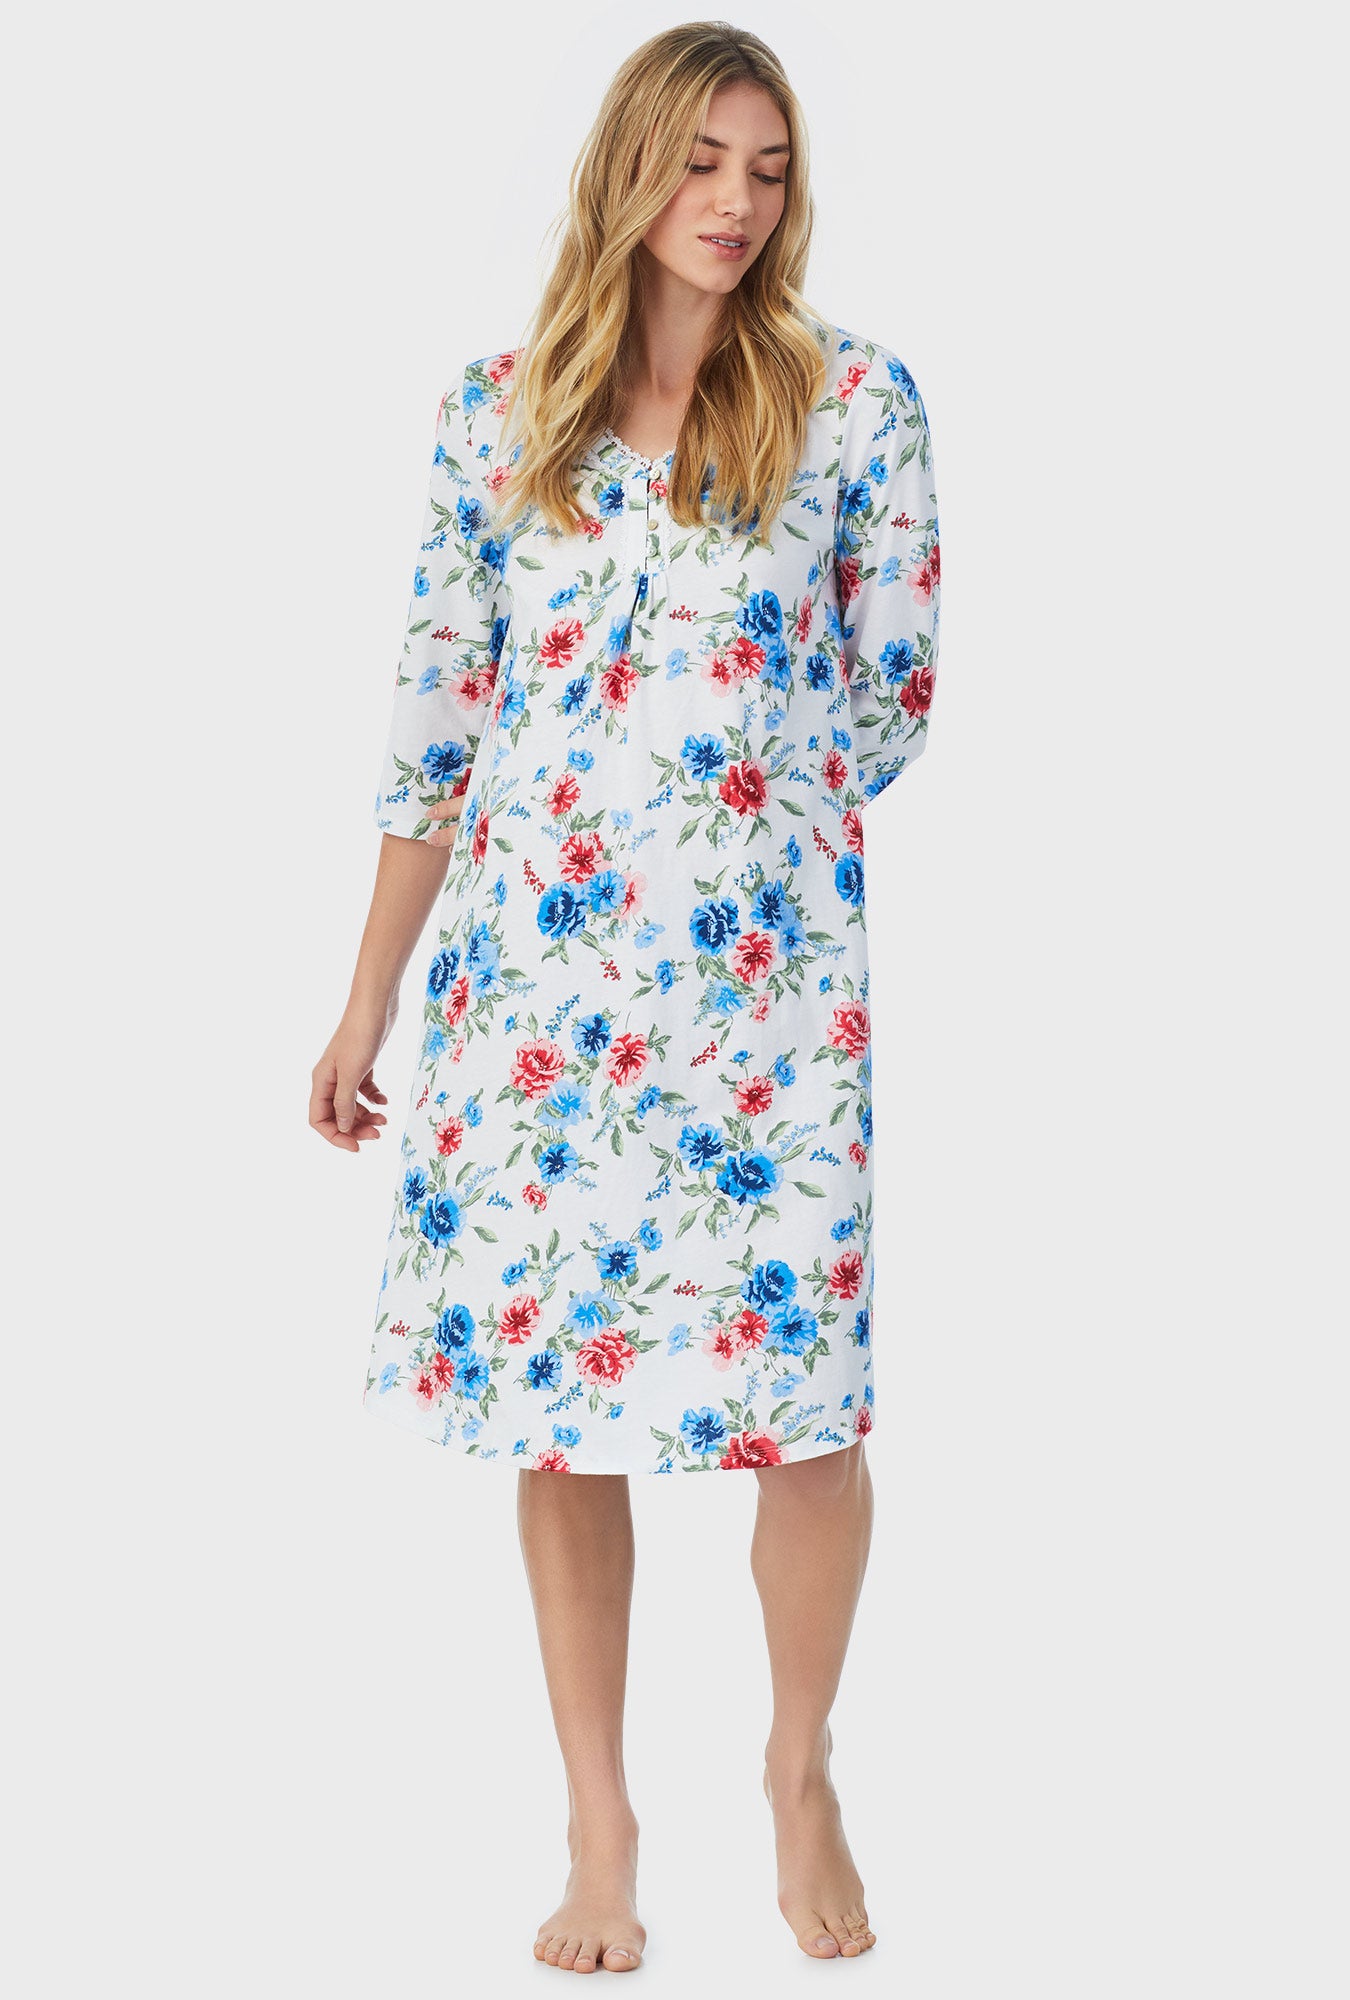 A lady wearing white quarter sleeve waltz nightgown with icy floral print.